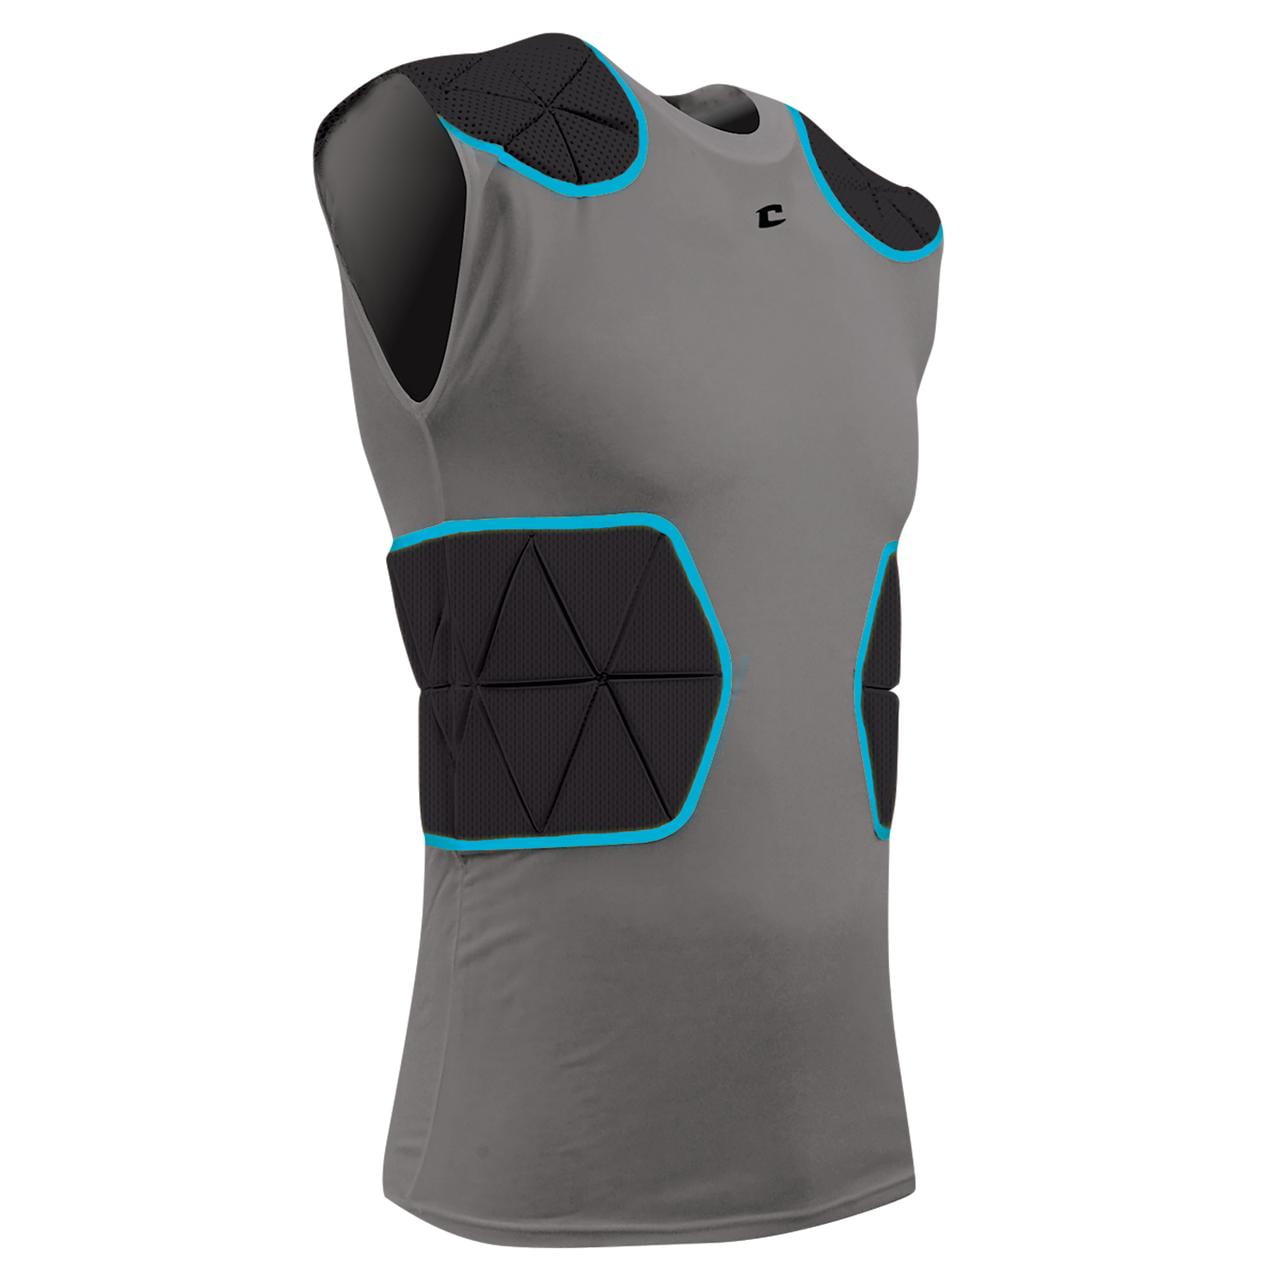 ADULT and YOUTH sizes Champro Bull Rush Compression Padded Shirt 